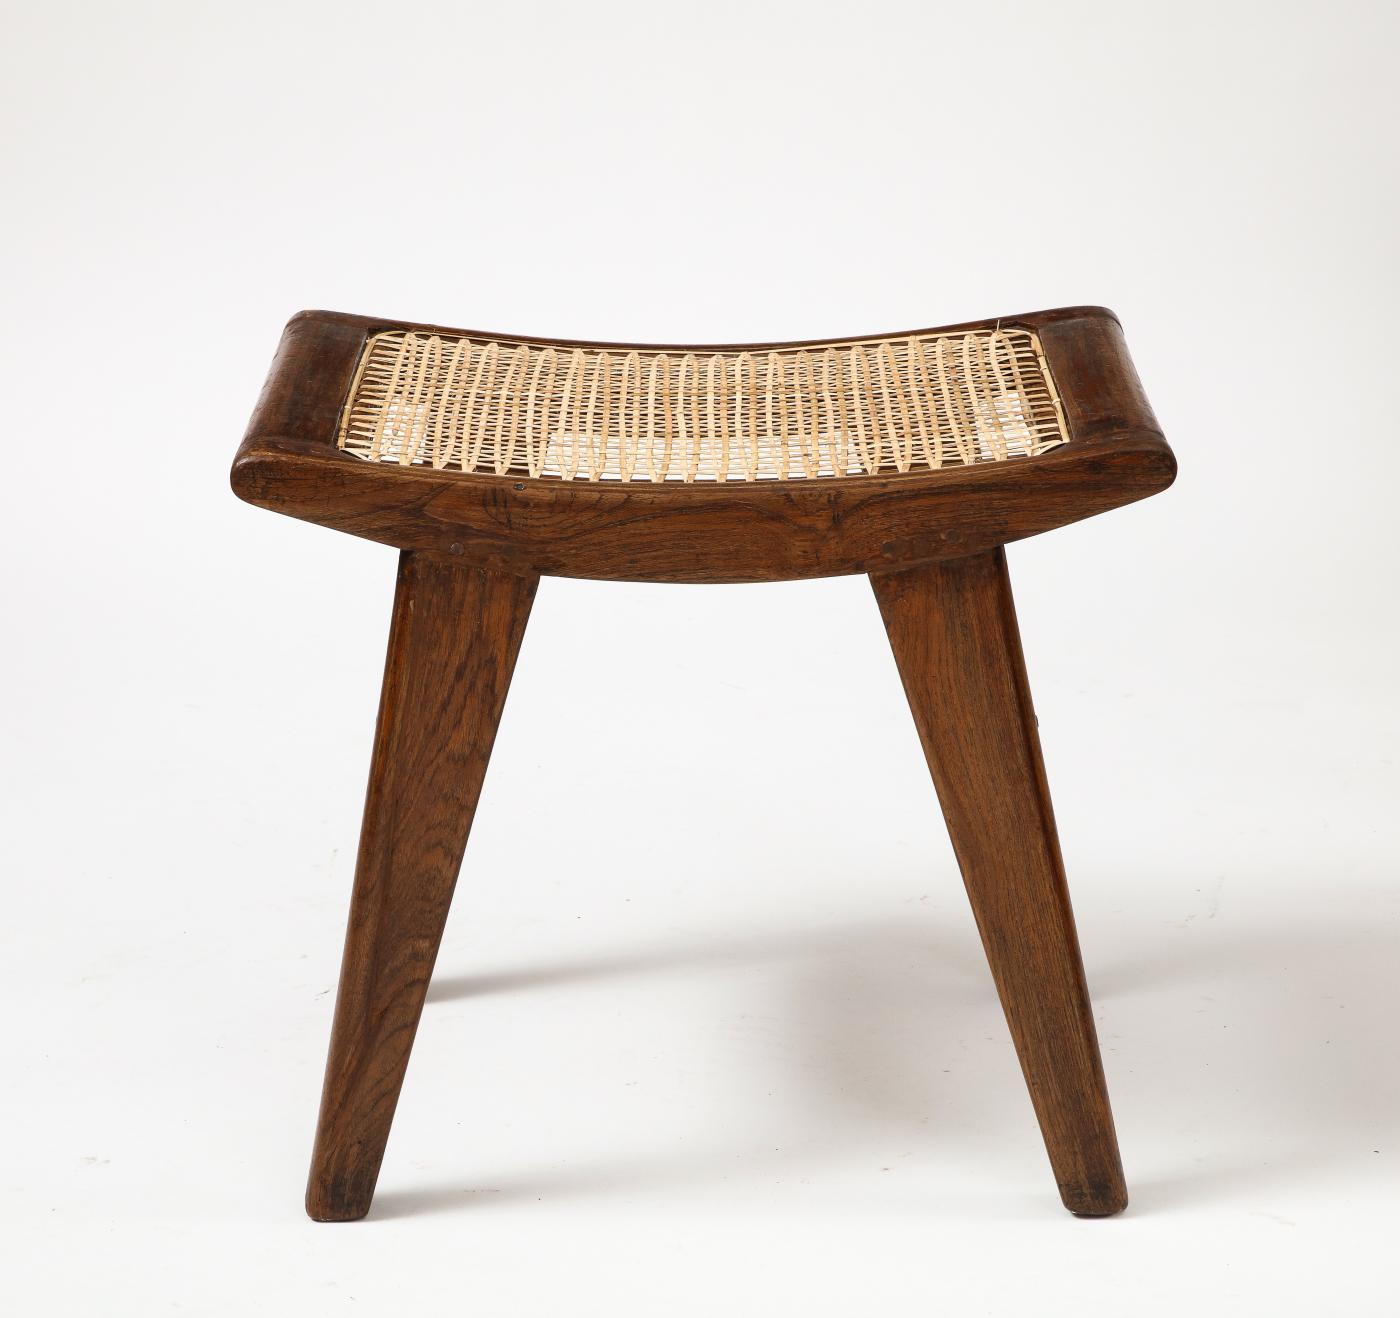 Minimalist Stool in Teak, Cane and Upholstery by Pierre Jeanneret, Chandigarh, c. 1959 For Sale